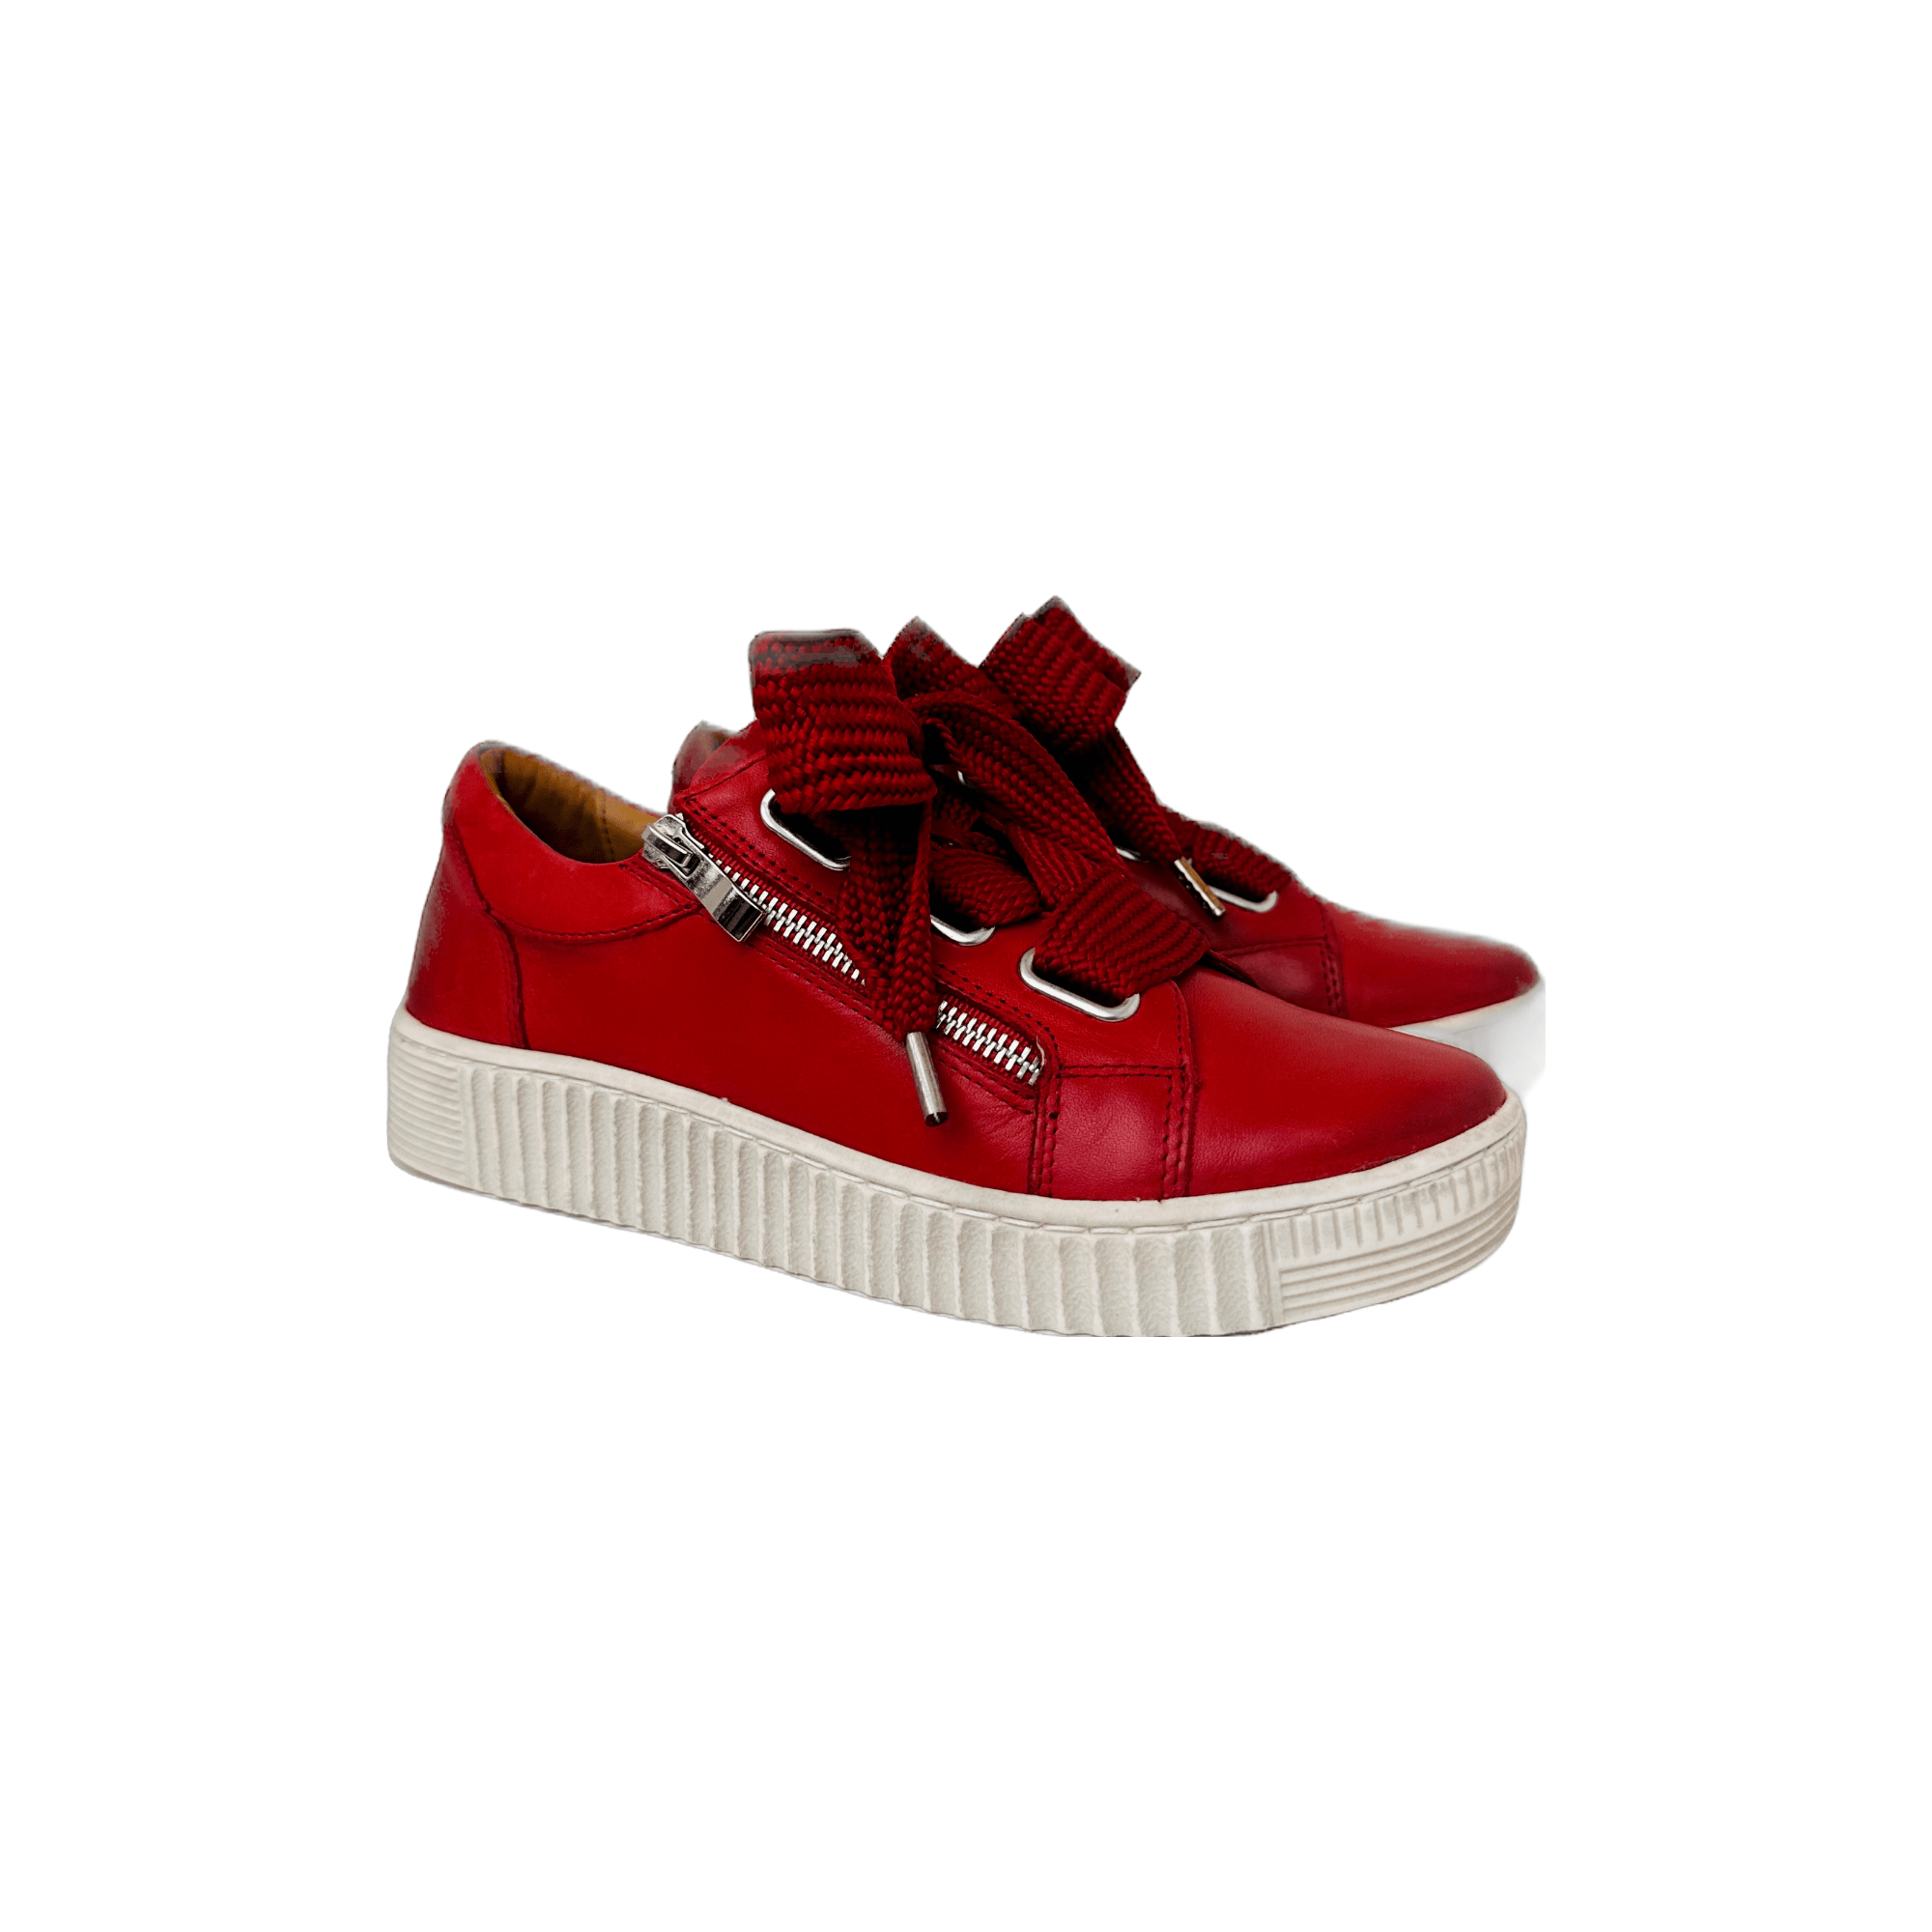 EOS Shoes Jovi-Red